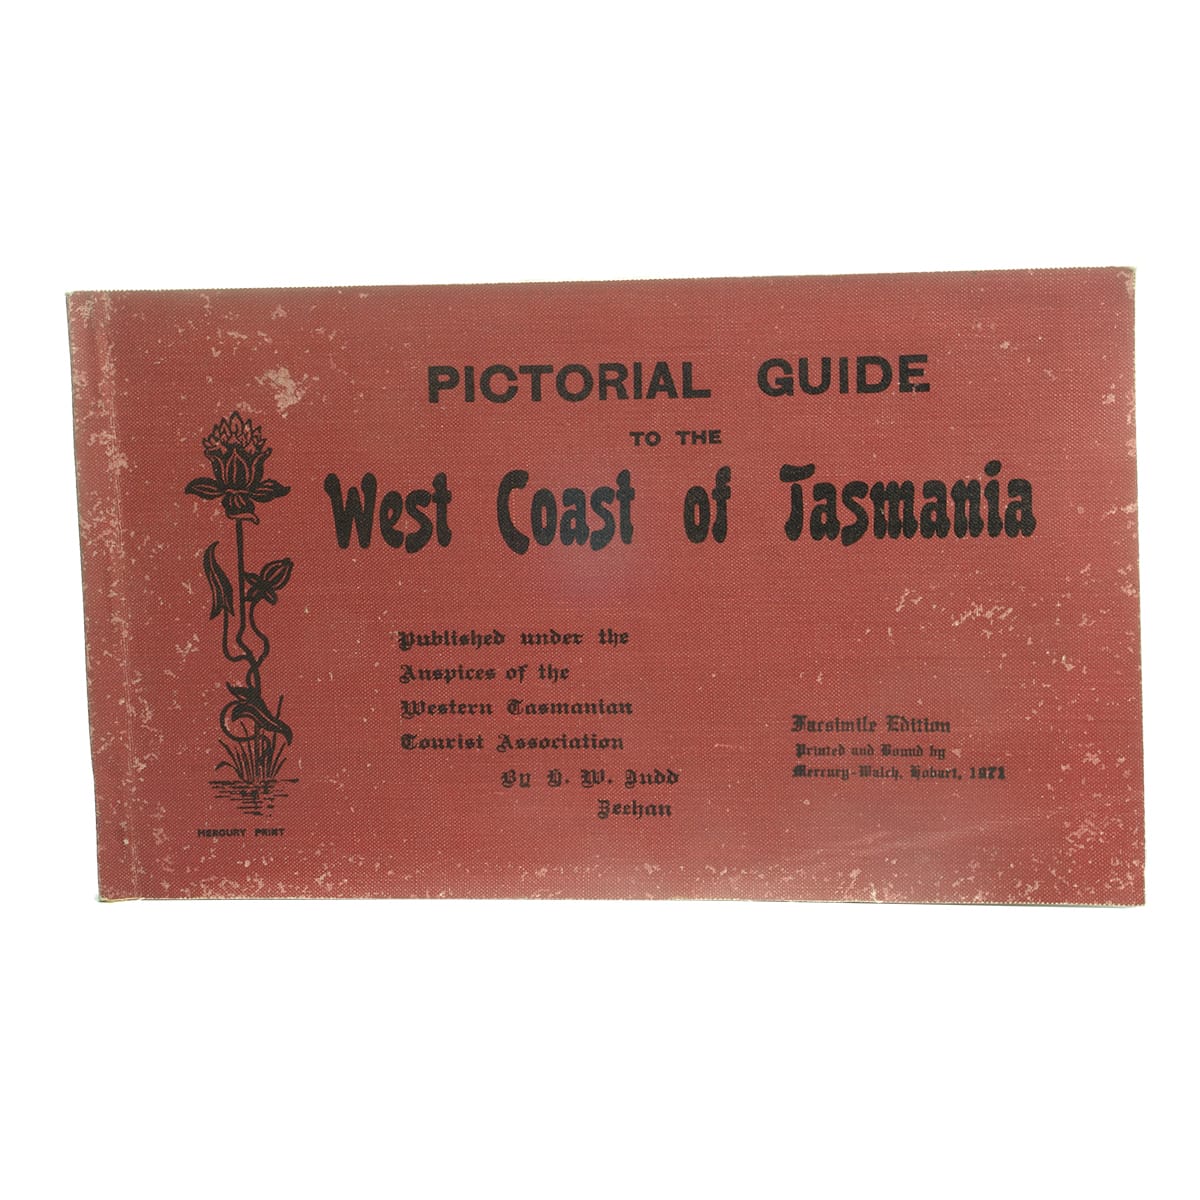 Pictorial Guide to the West Coast of Tasmania, facsimile edition, 1971.